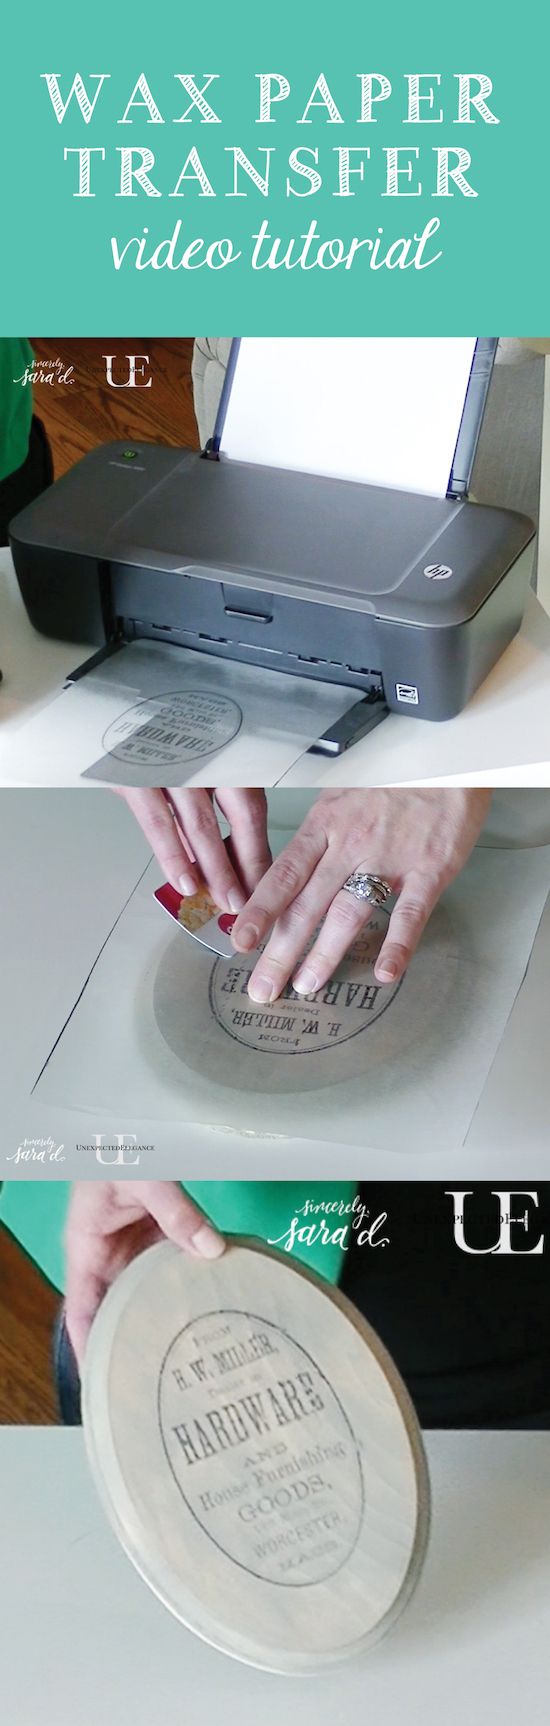 26 Easy DIY Projects for Transferring Image to Wood